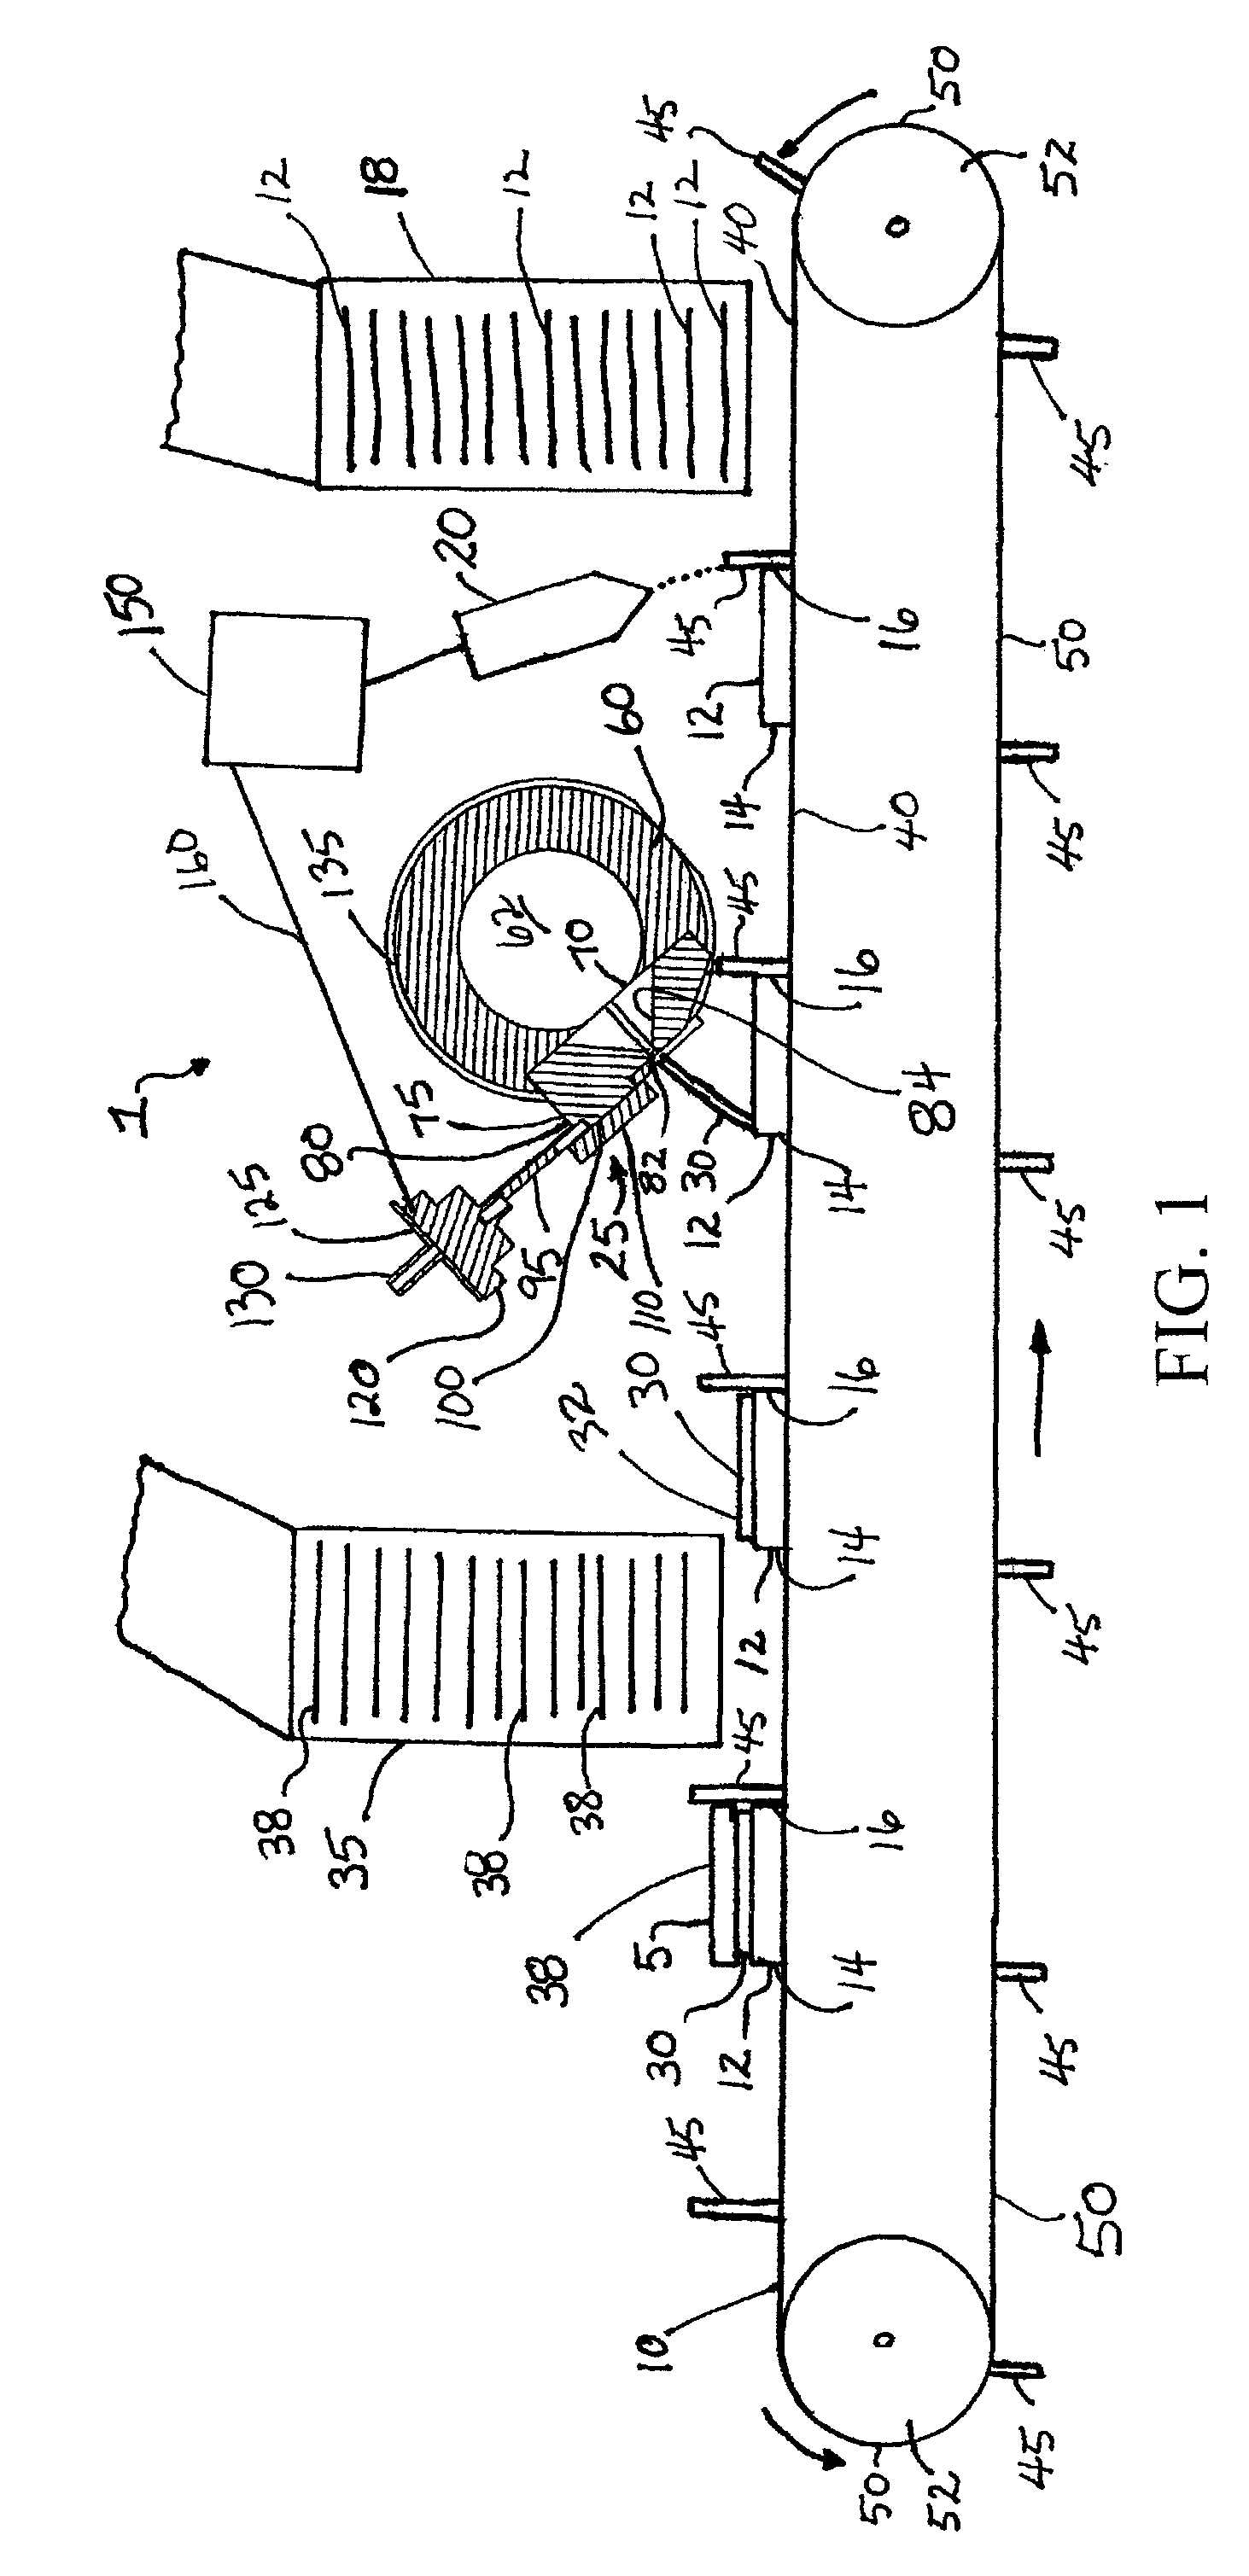 Ribbon cutter apparatus and method for making sandwich baked goods